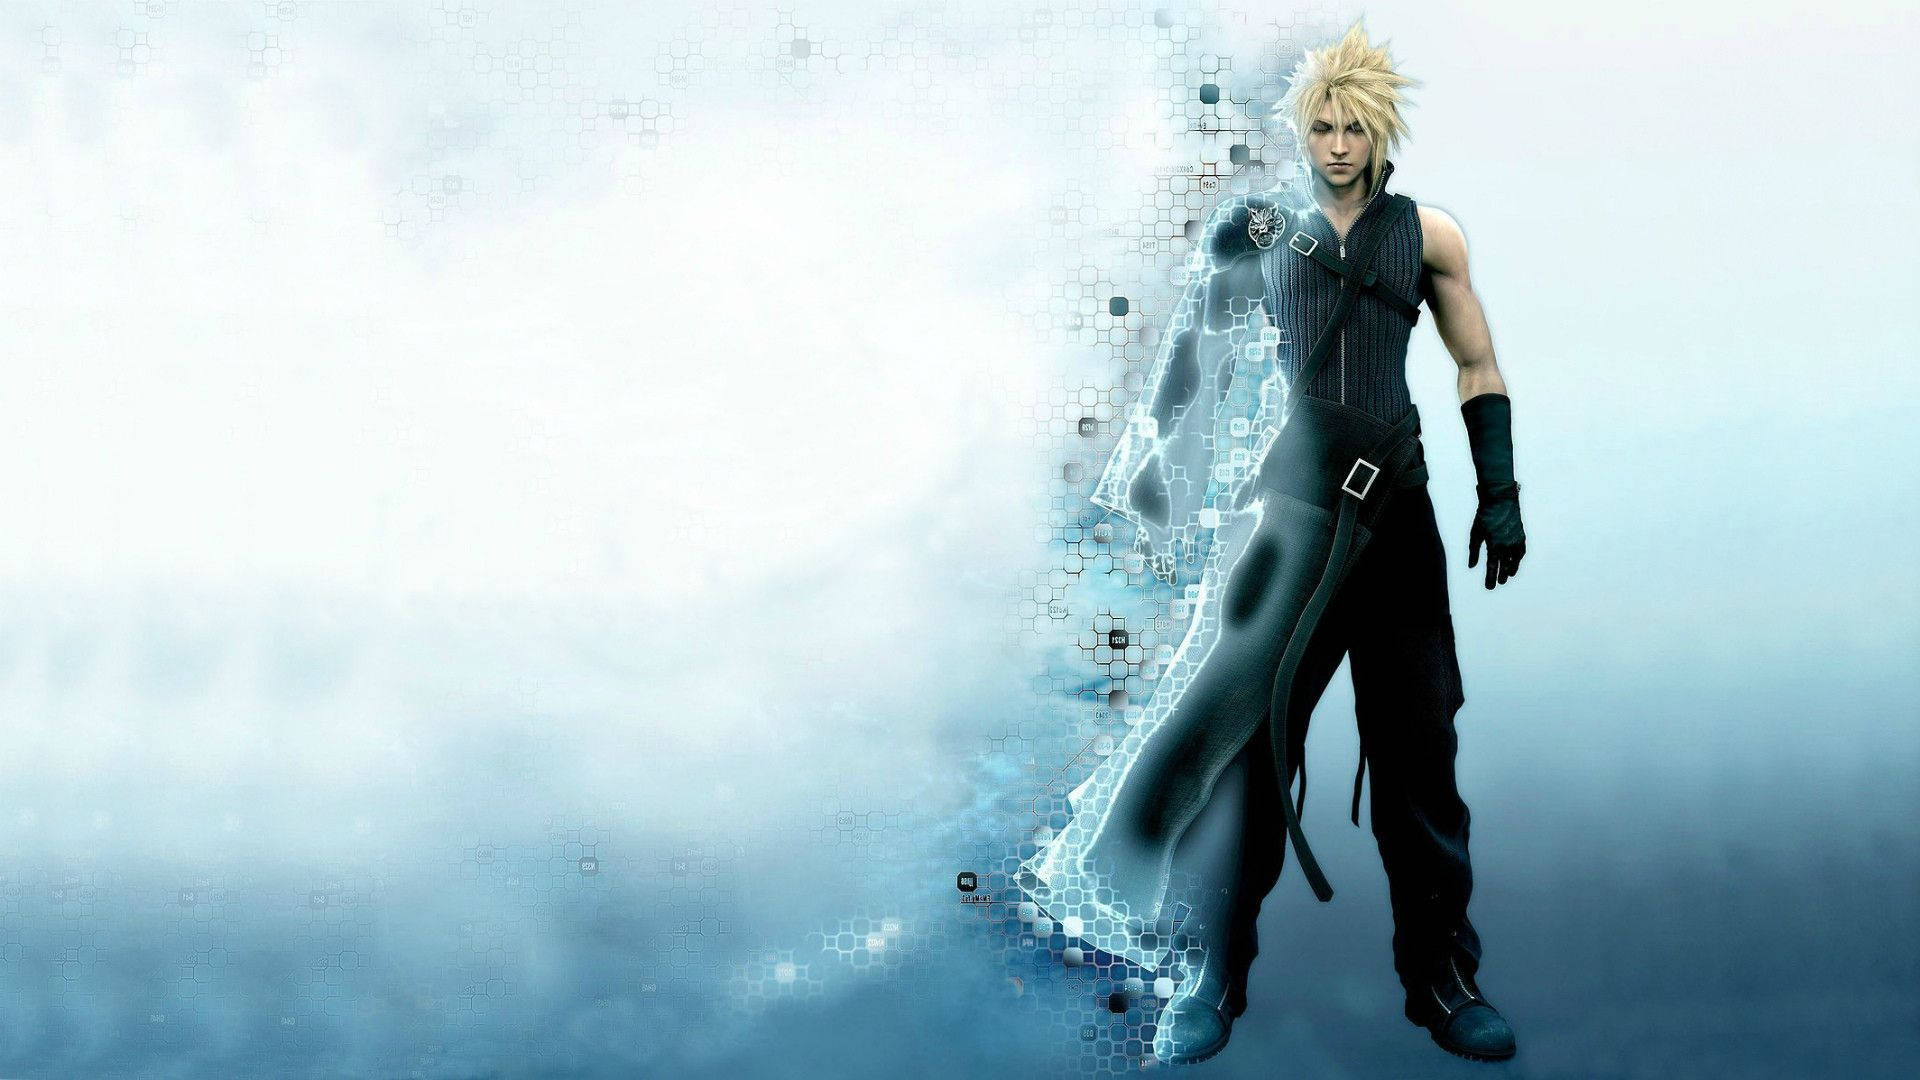 Cloud Strife and Tifa Lockhart 4K Final Fantasy Wallpaper HD Games 4K  Wallpapers Images Photos and Background  Wallpapers Den